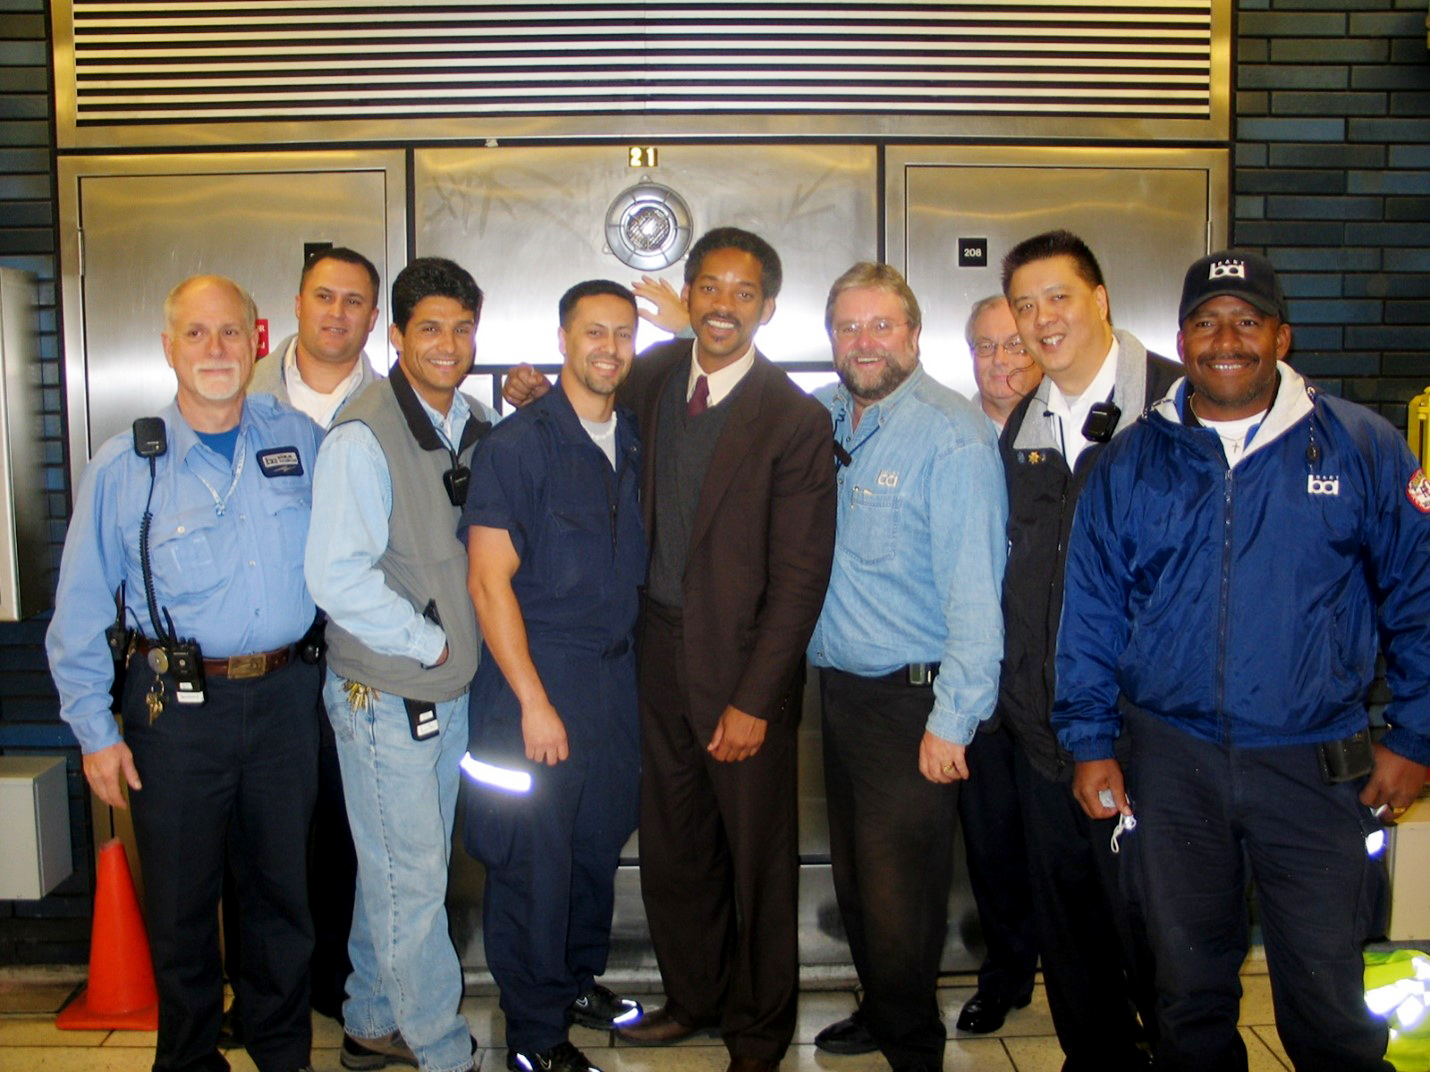 Behind-the-scenes of the filming of “The Pursuit of Happyness” at BART